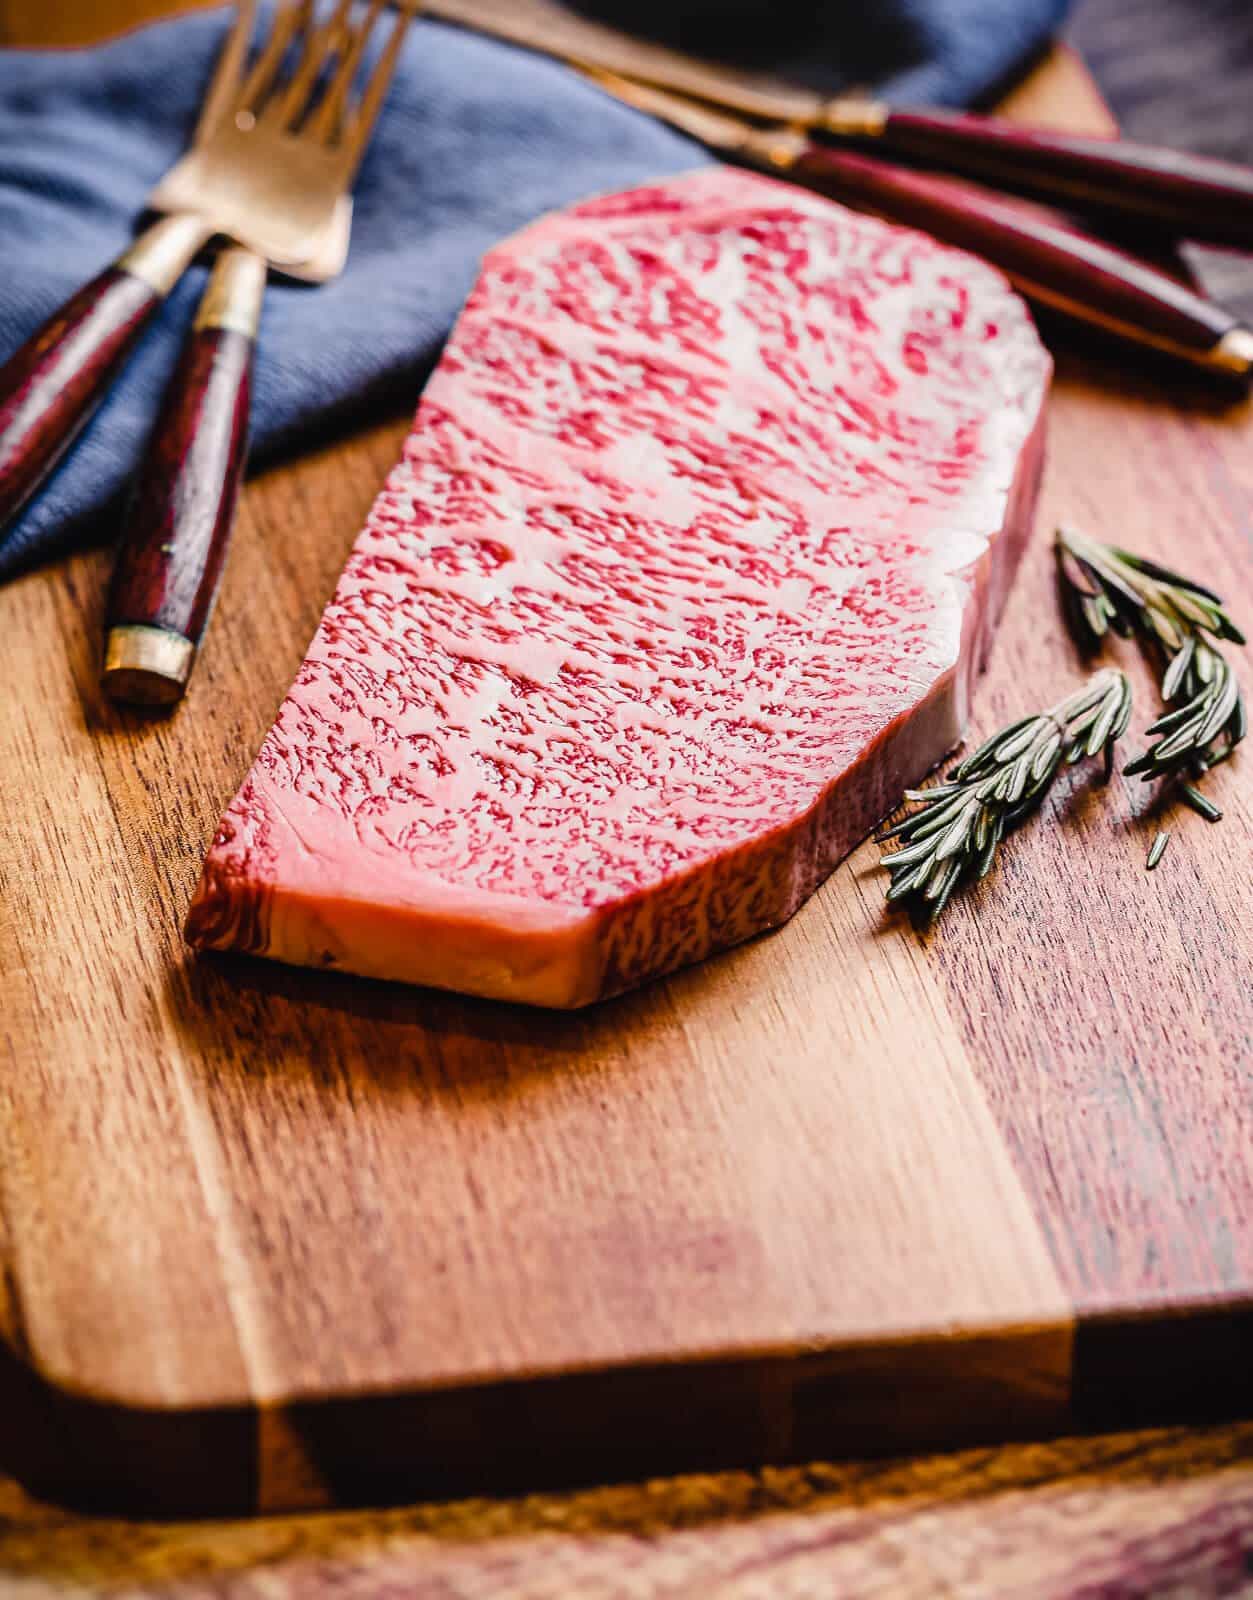 What is Wagyu Beef?